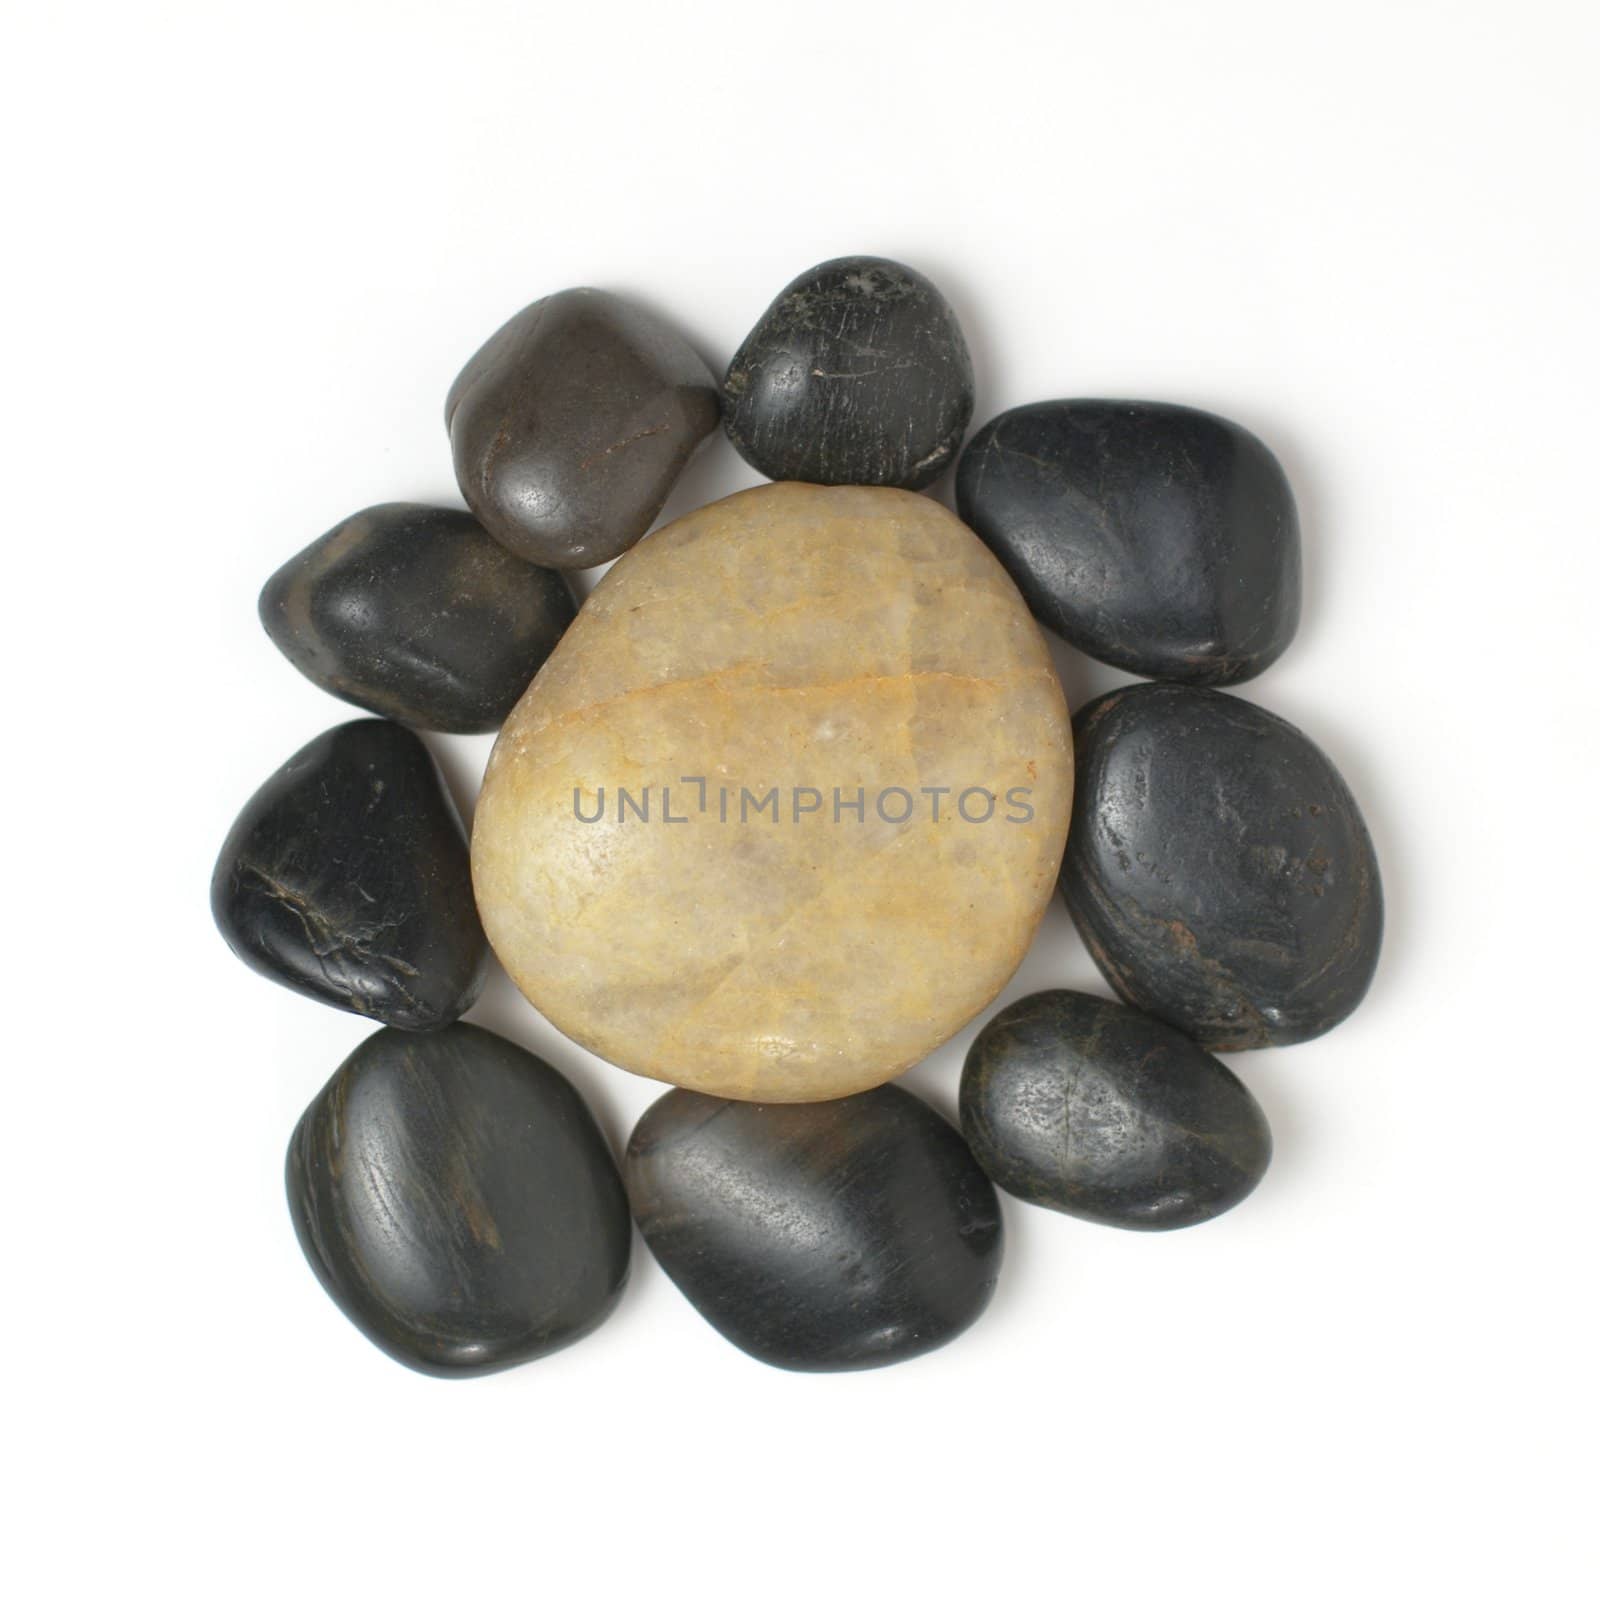 Group of rocks on display on a white background.